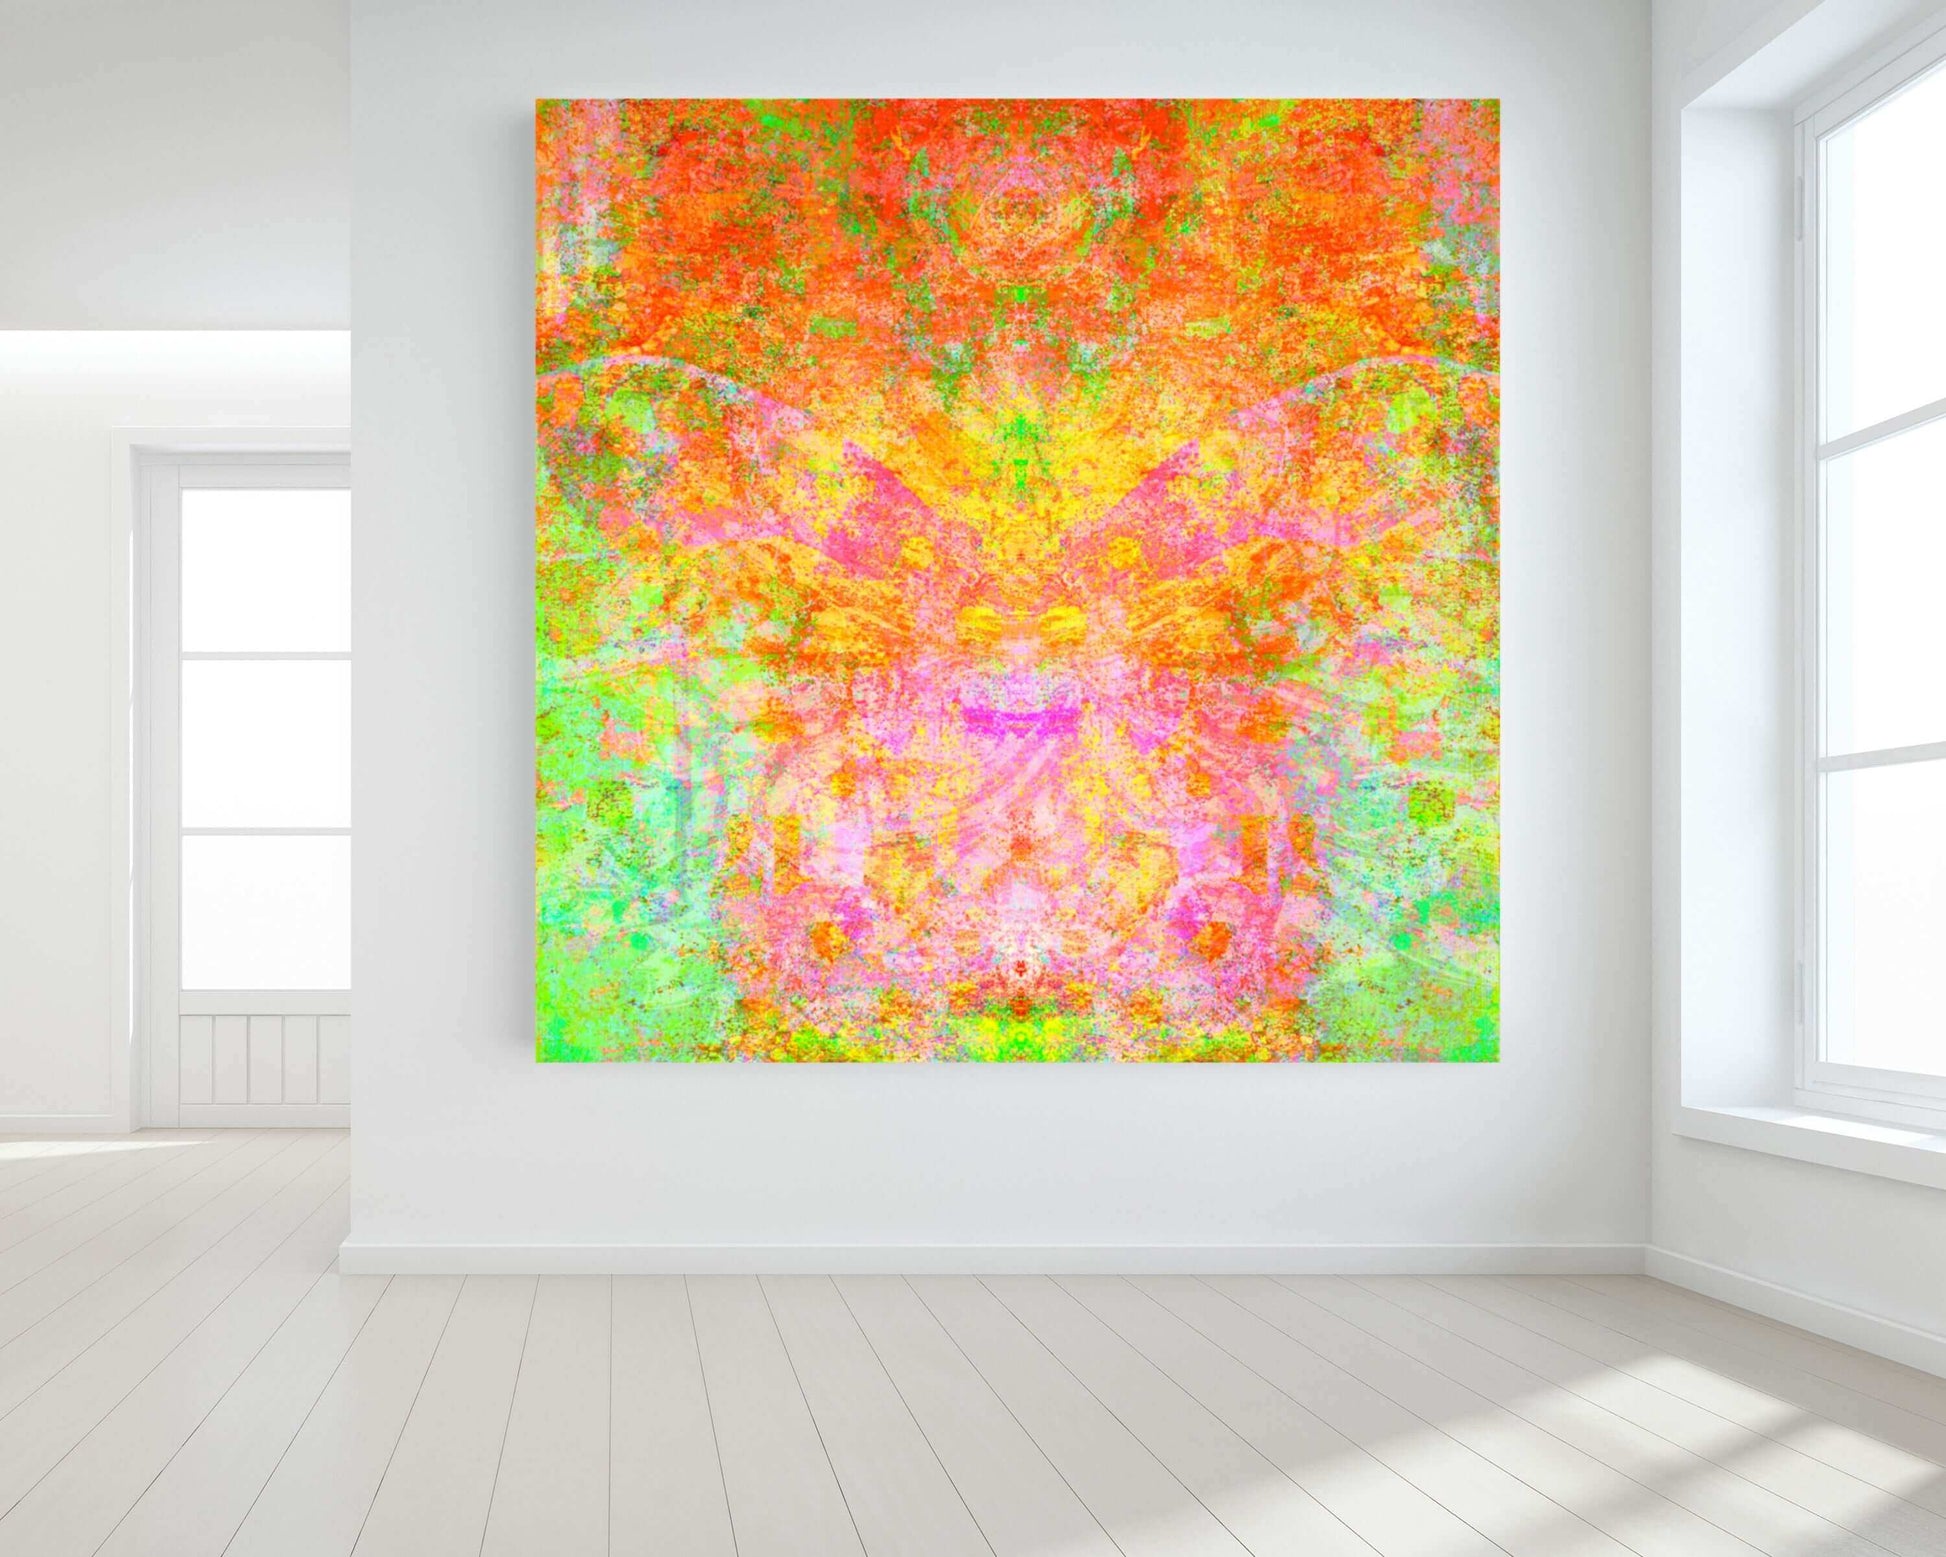 Green and Orange Butterfly Shaped “Firefly” Abstract Art Canvas Print Wall Art Large Canvas on Wall